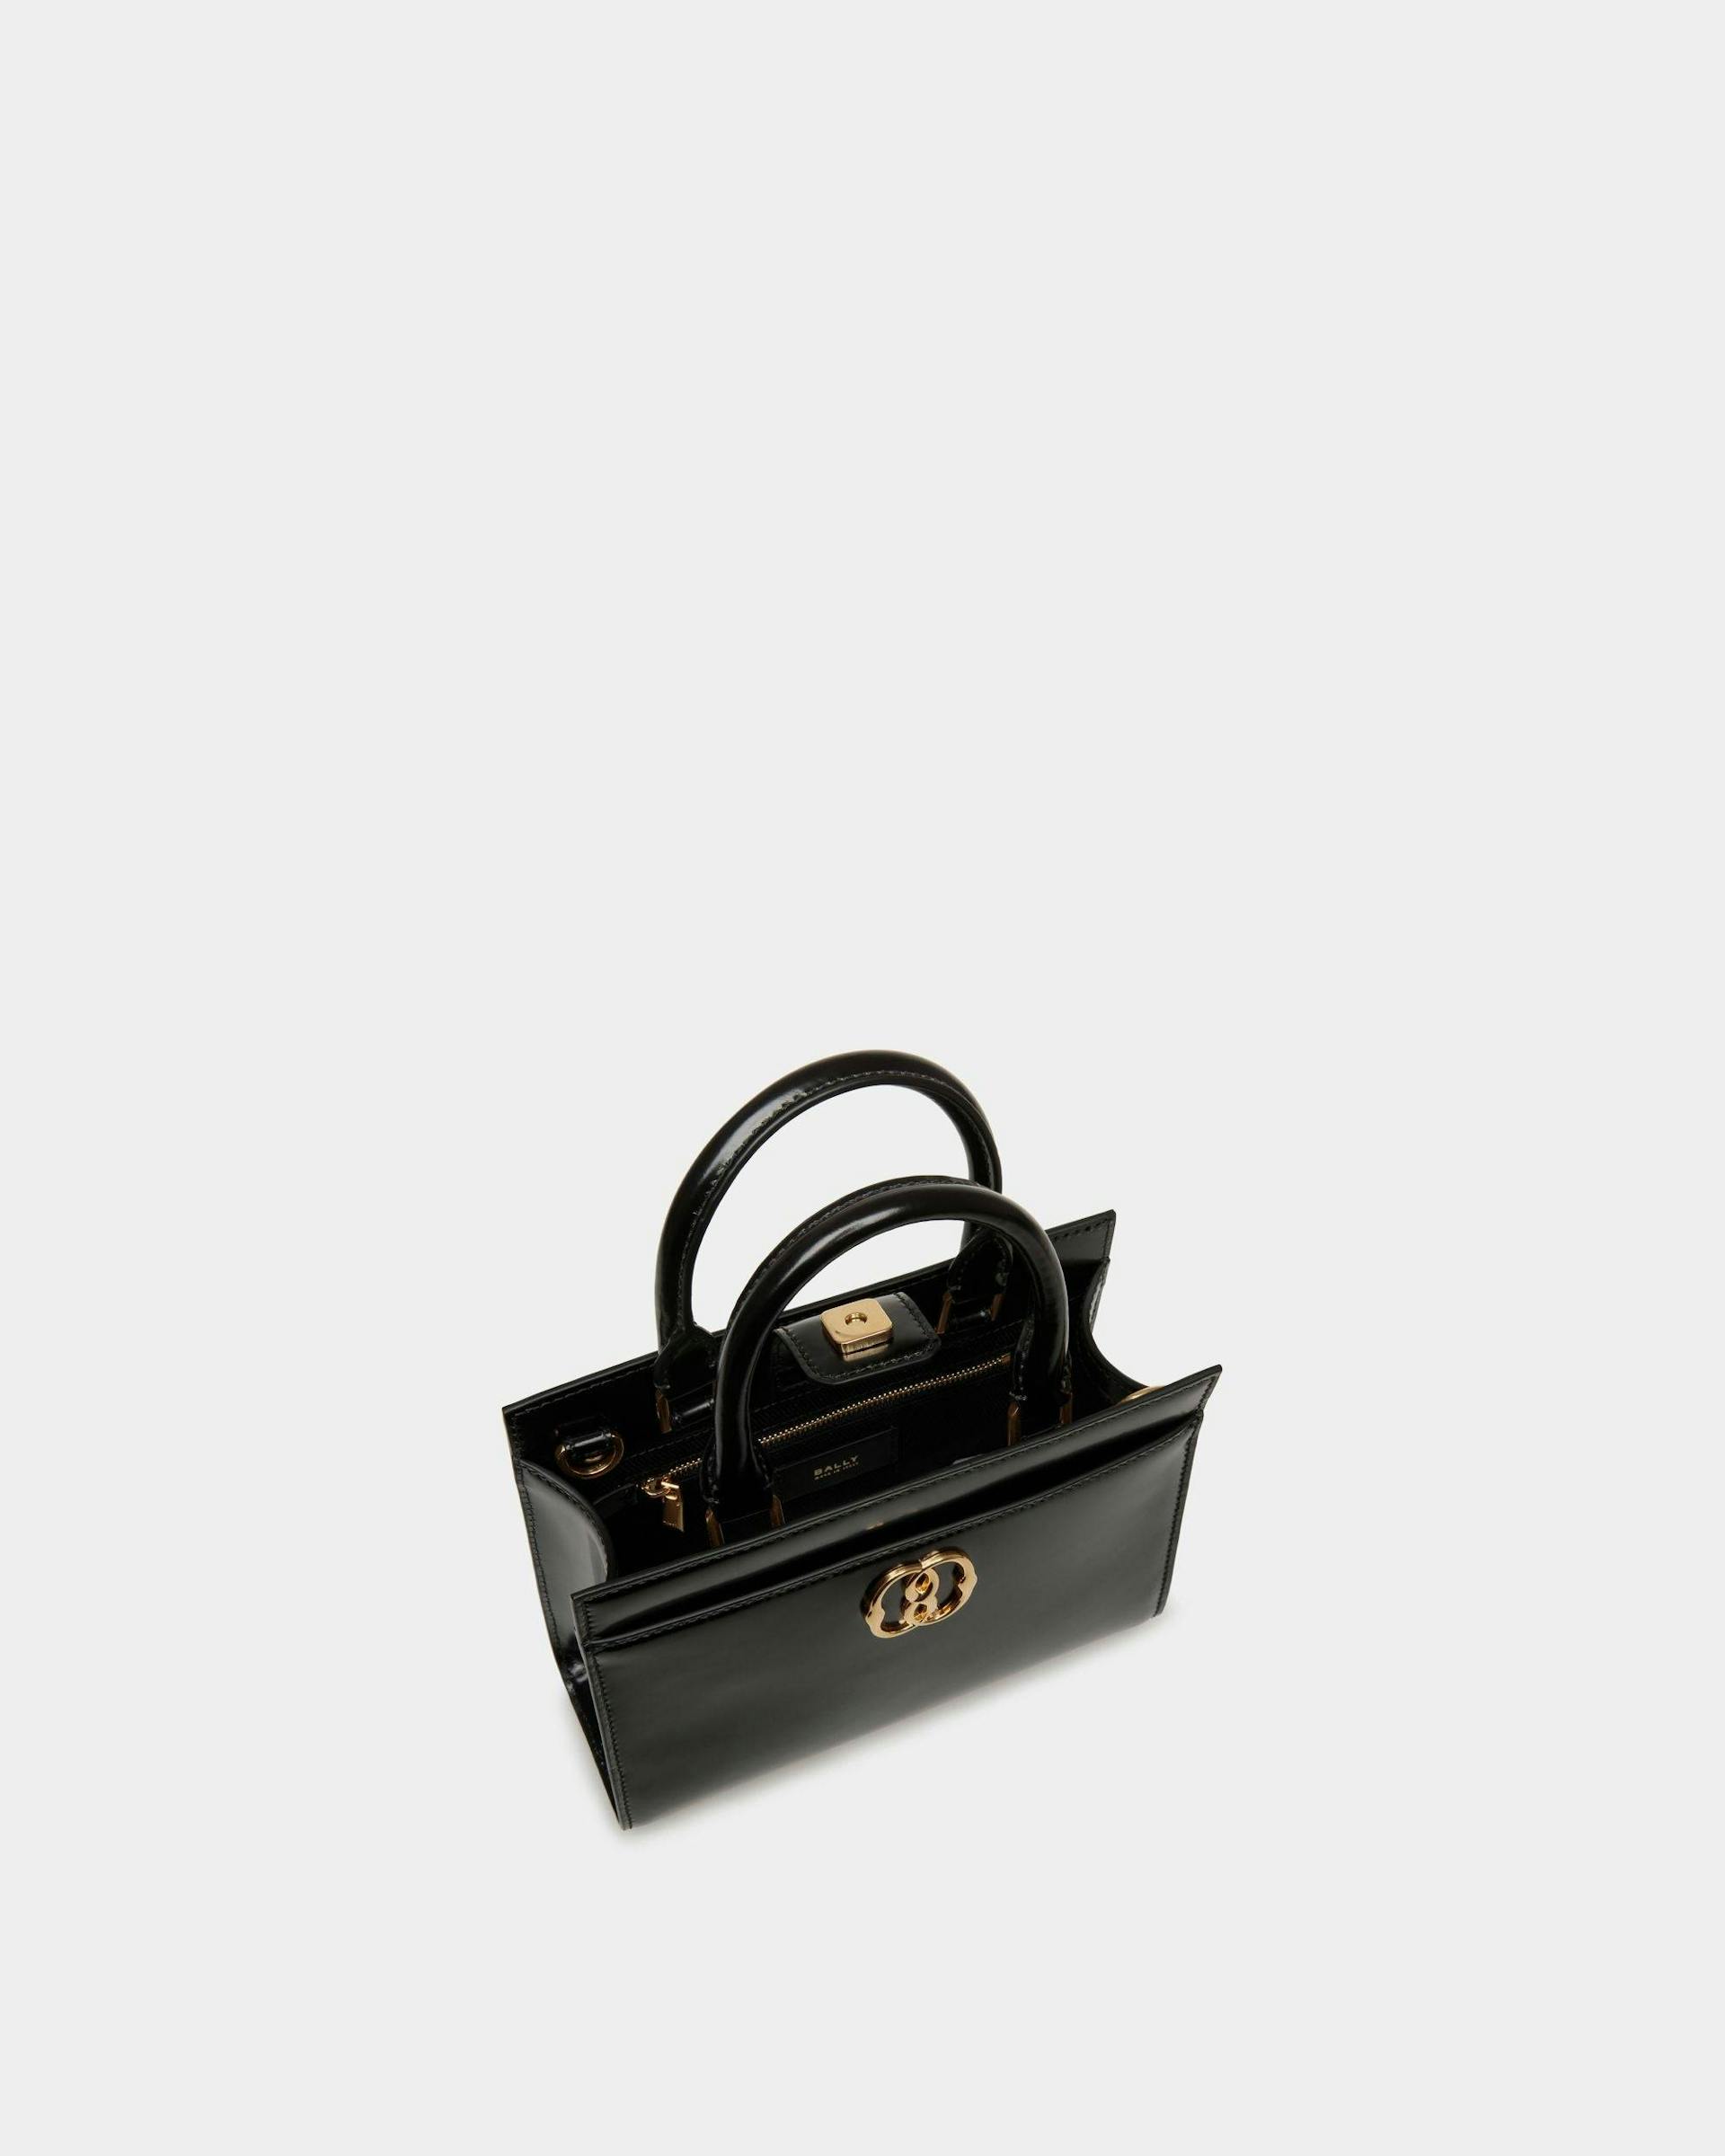 Women's Emblem Small Tote Bag In Black Patent Leather | Bally | Still Life Open / Inside